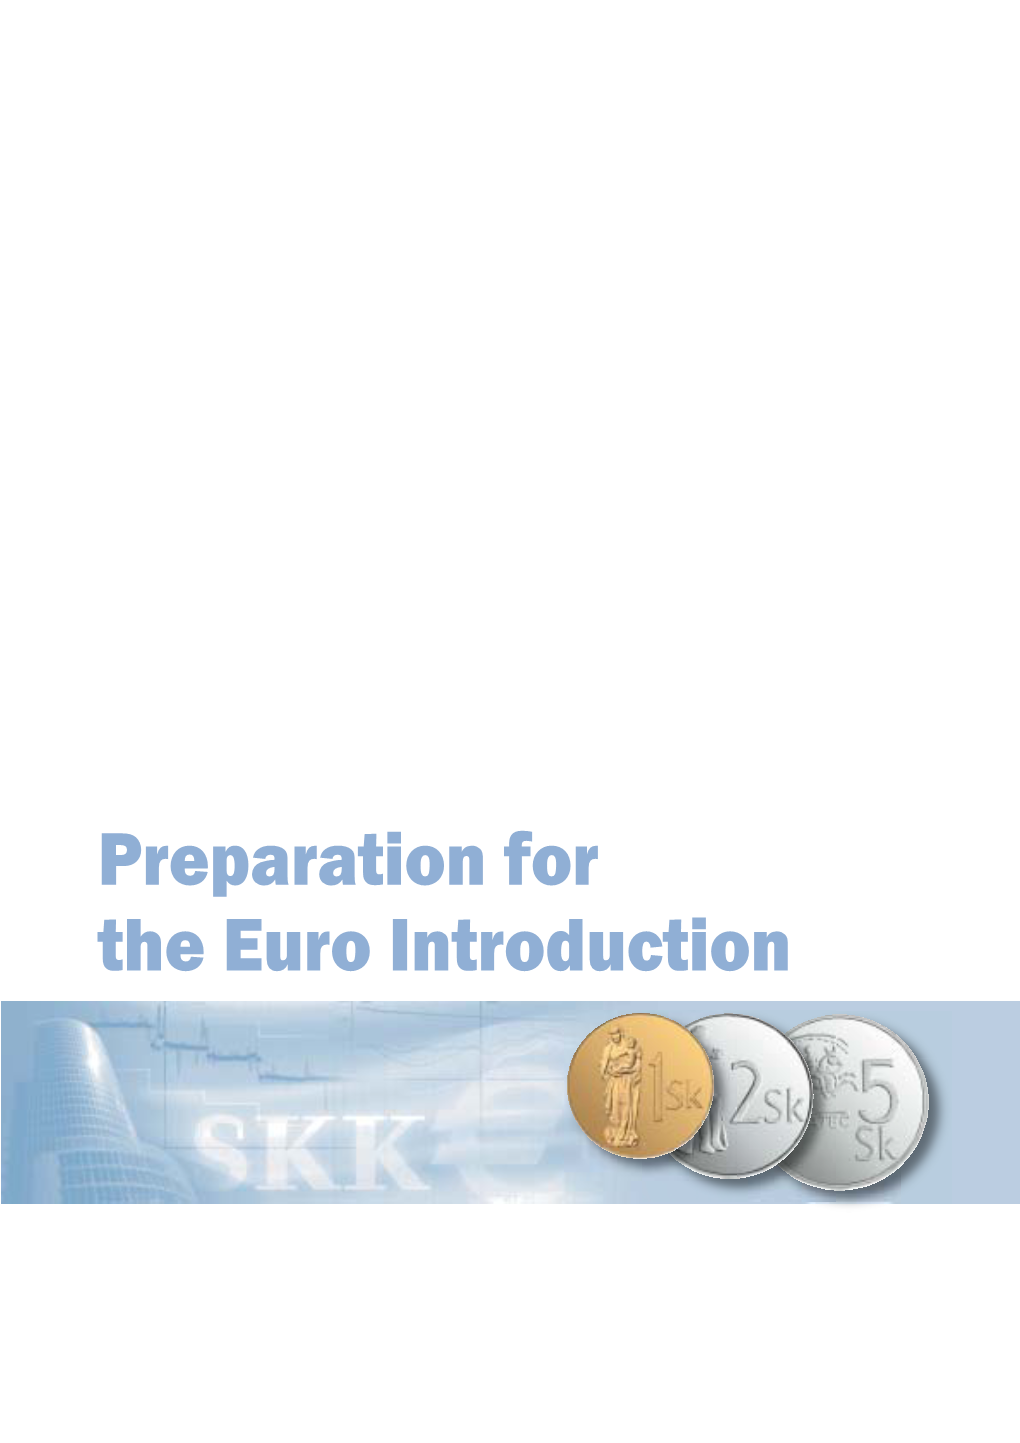 Preparation for the Euro Introduction